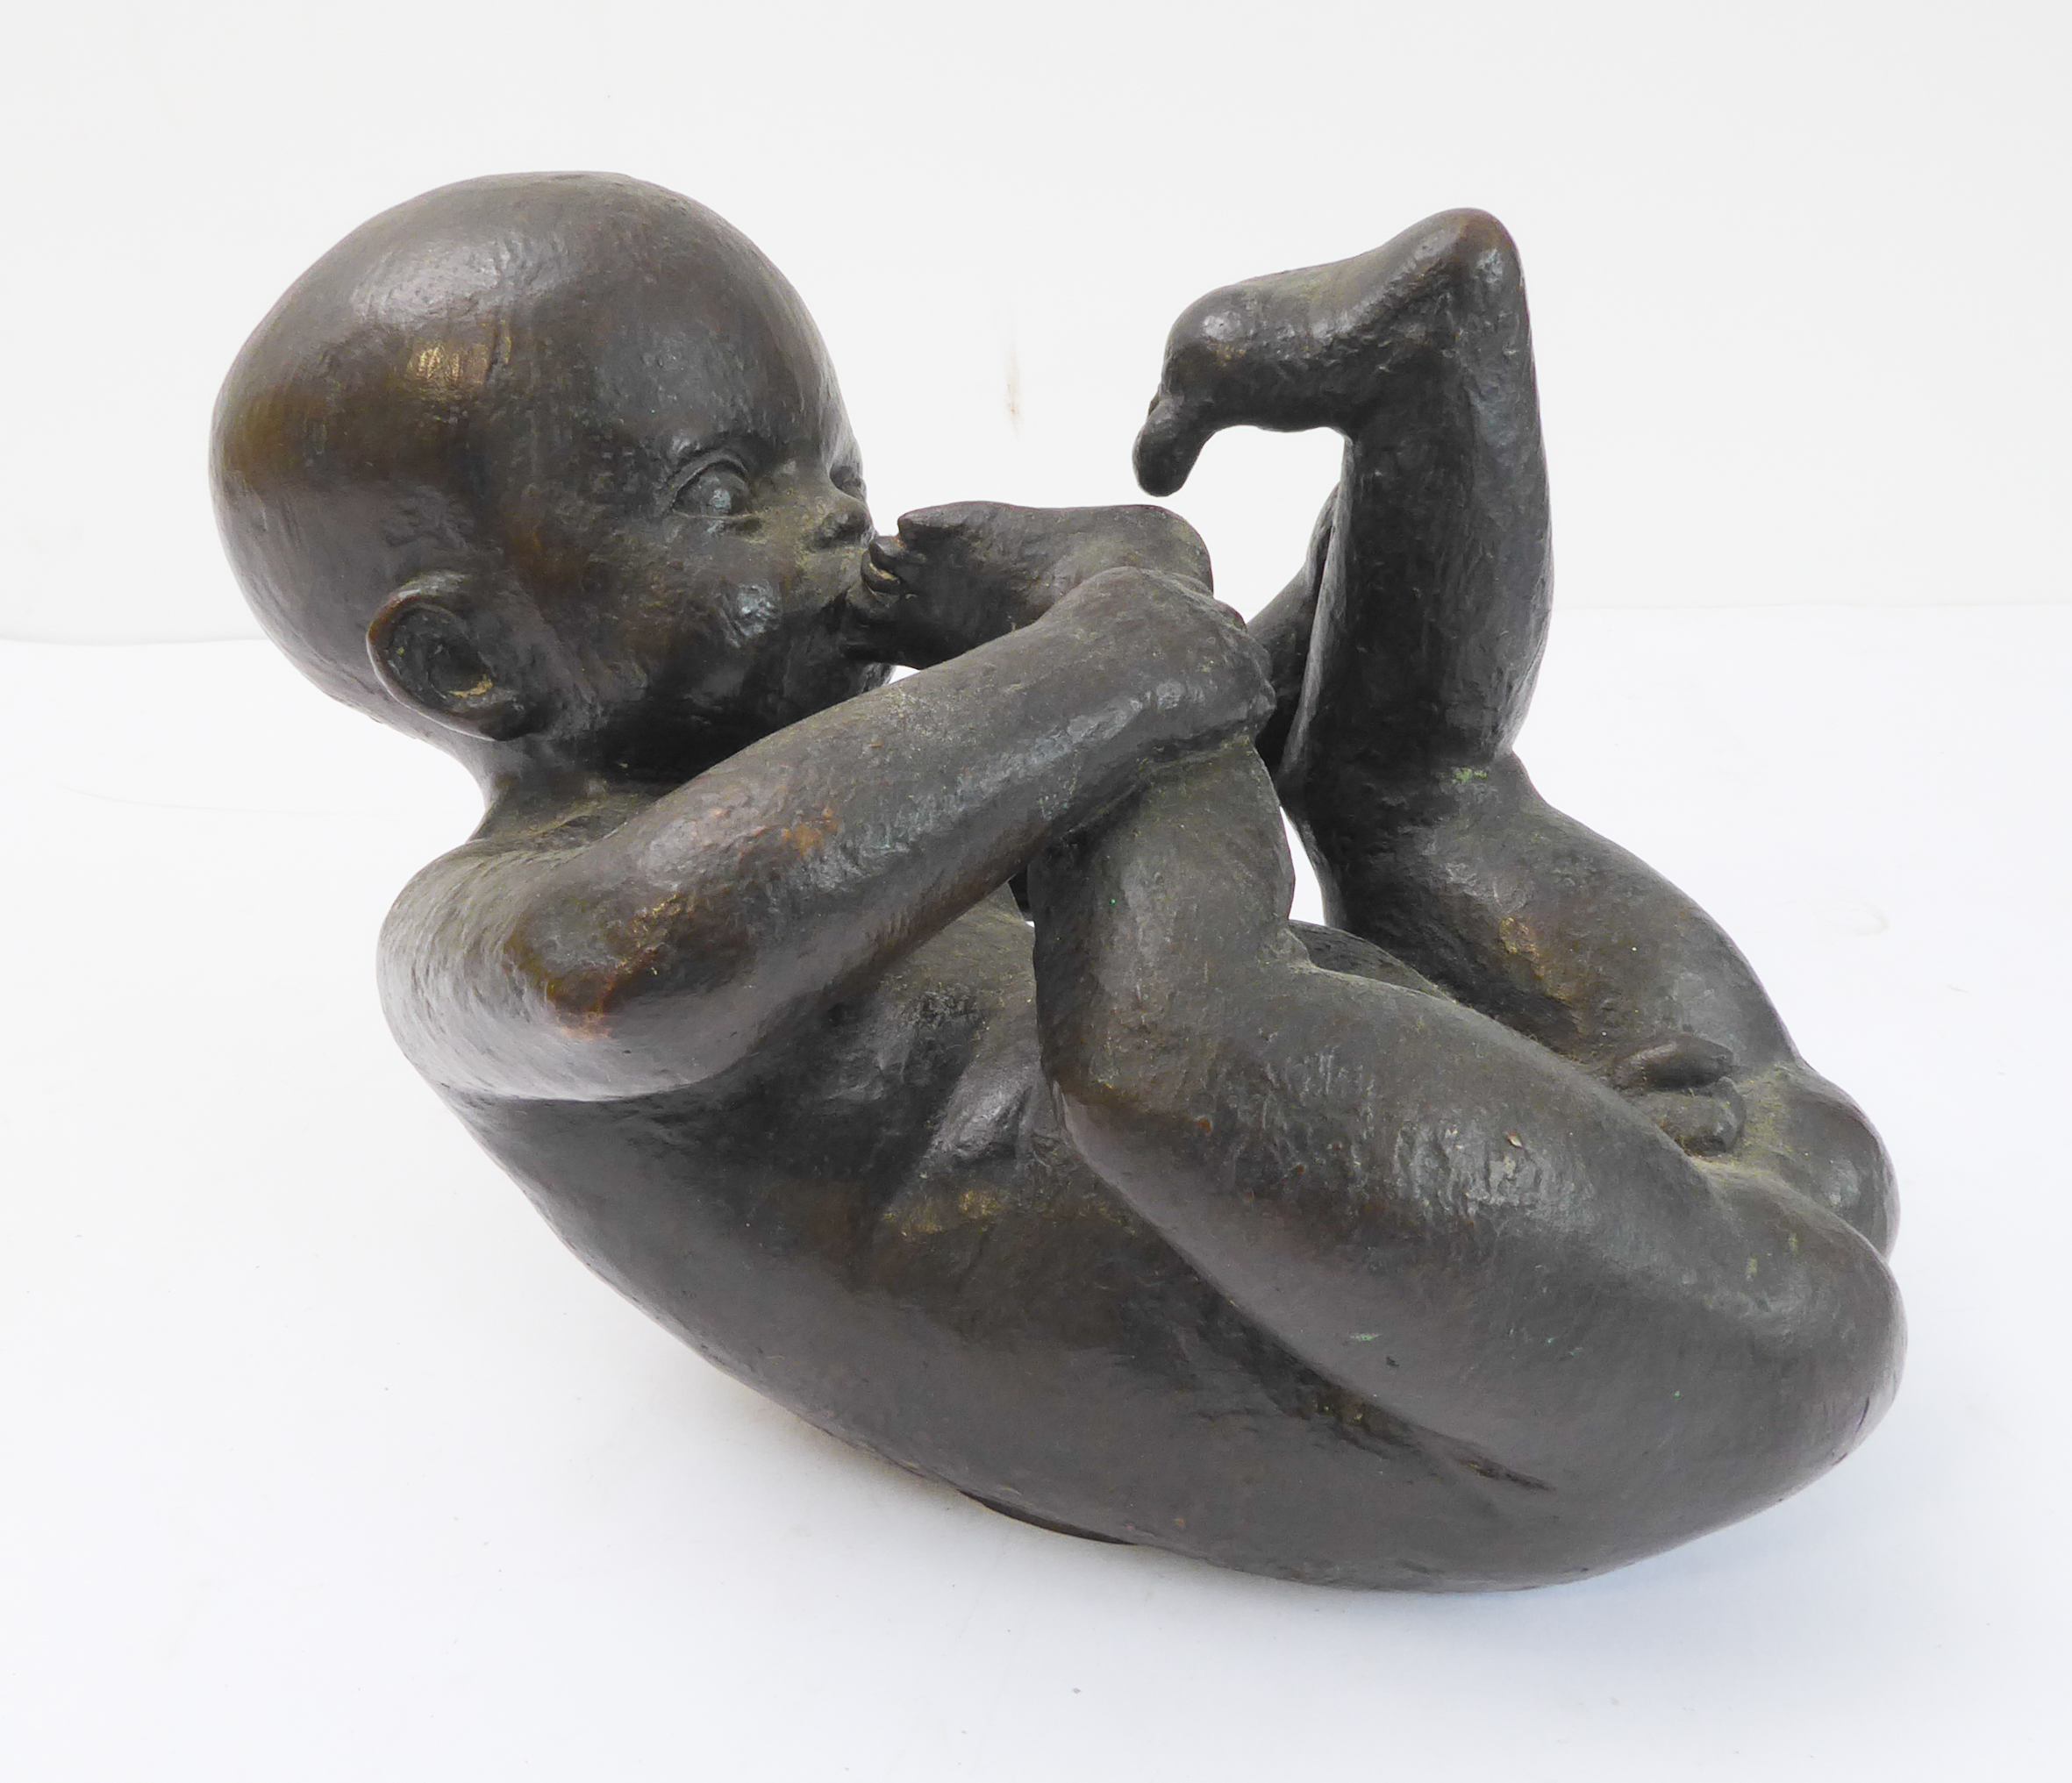 HERMANN LICKFELD (1898-1941) : an interesting bronze sculpture of a nude male infant, signed on